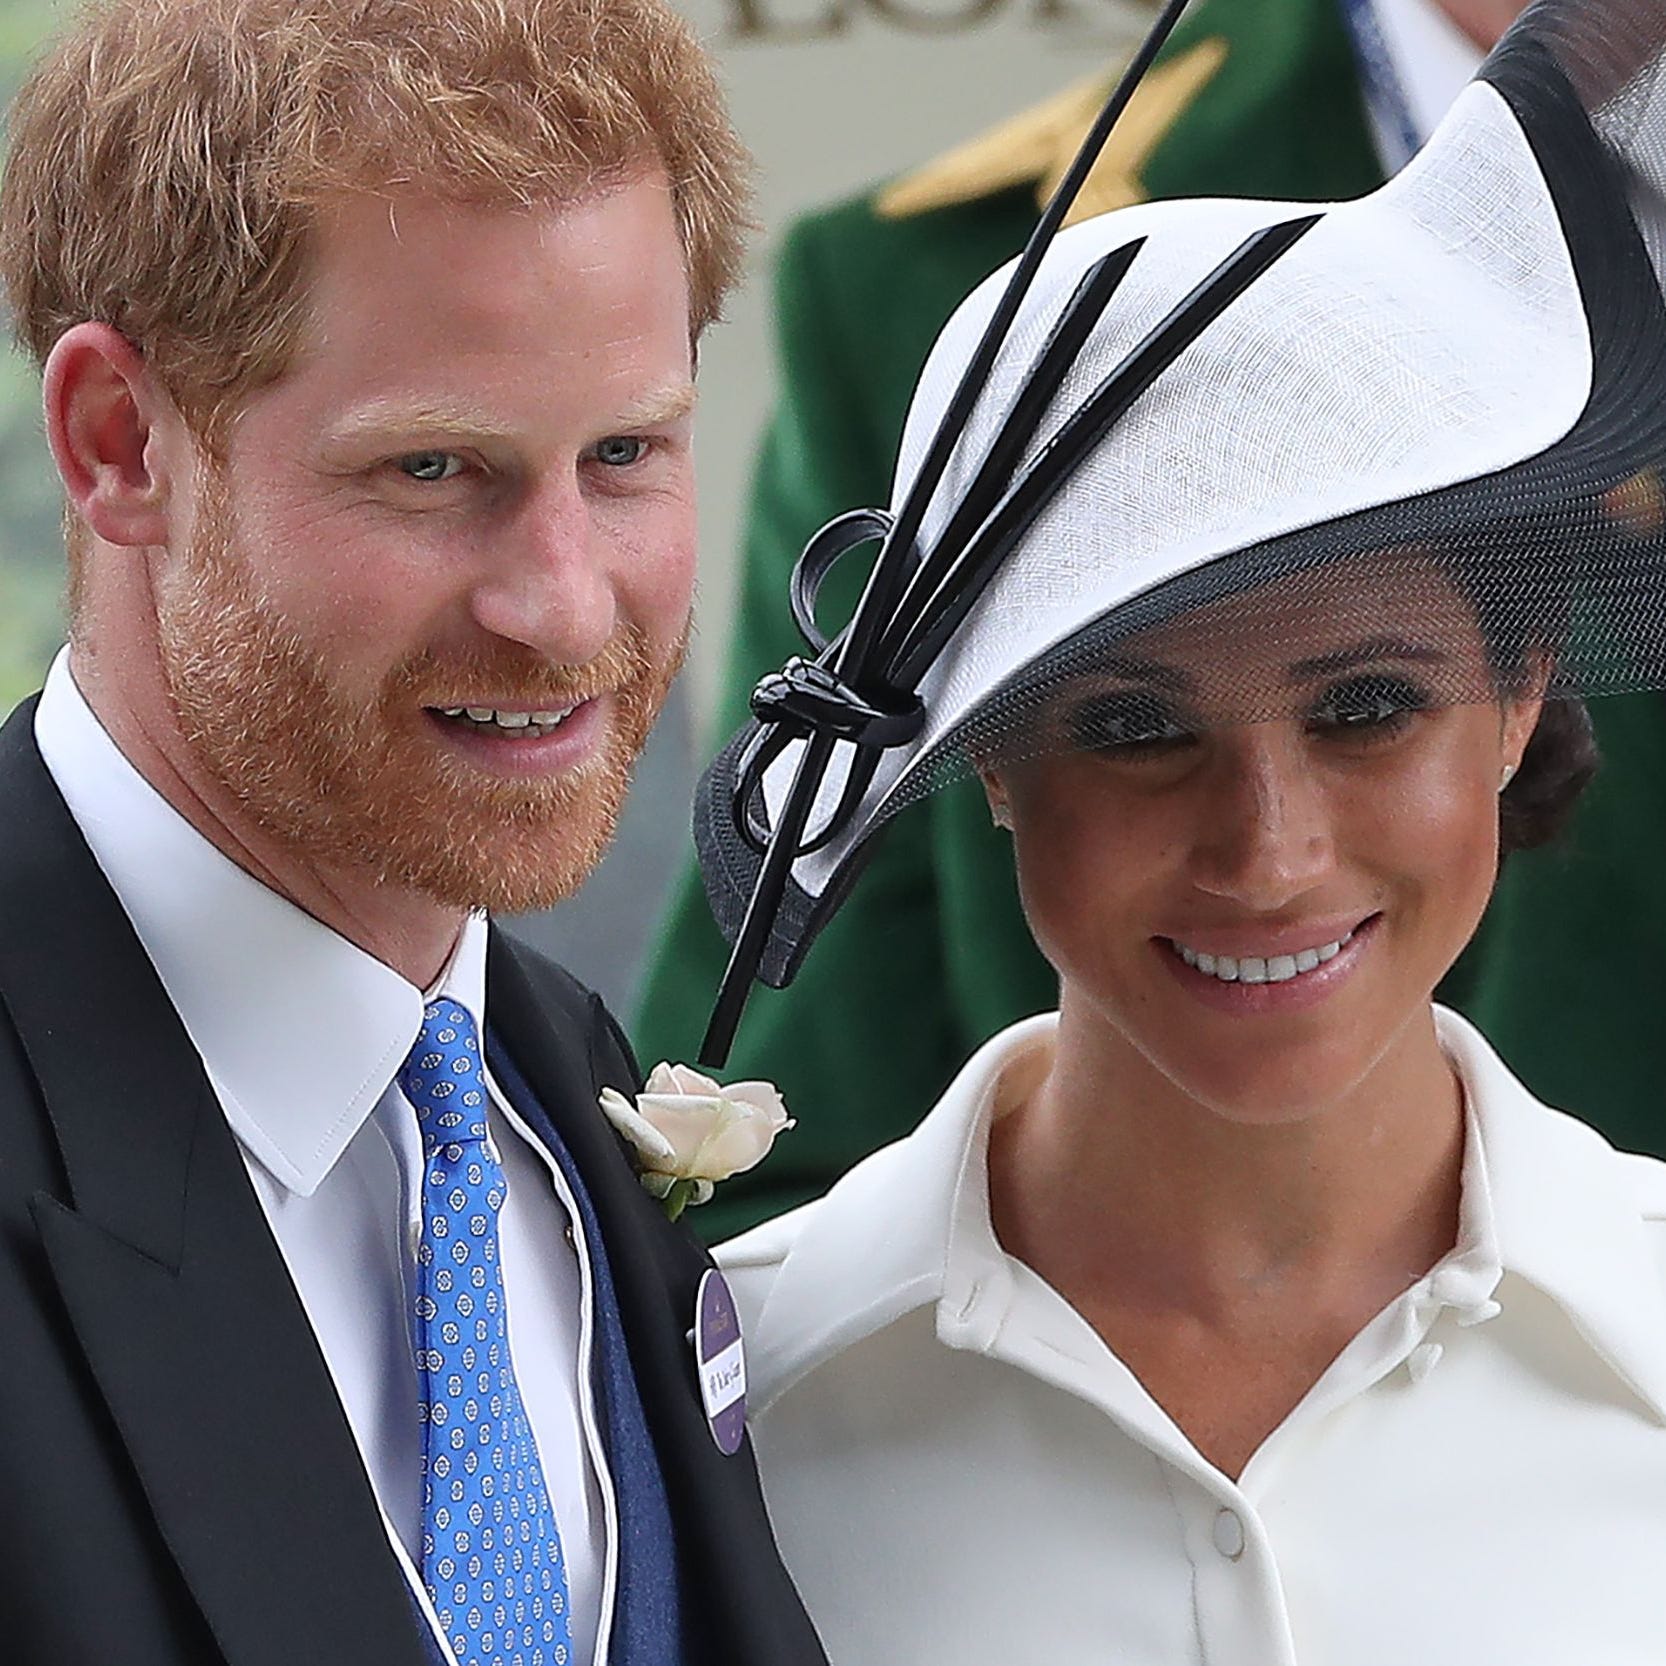 Duchess Meghan got a chance to present her first trophy as a royal on June 19, 2018, on the opening day of Royal Ascot week, when she accompanied Prince Harry and a host of other royals to the famous horse-racing meet. The new Duke and Duchess of Sus